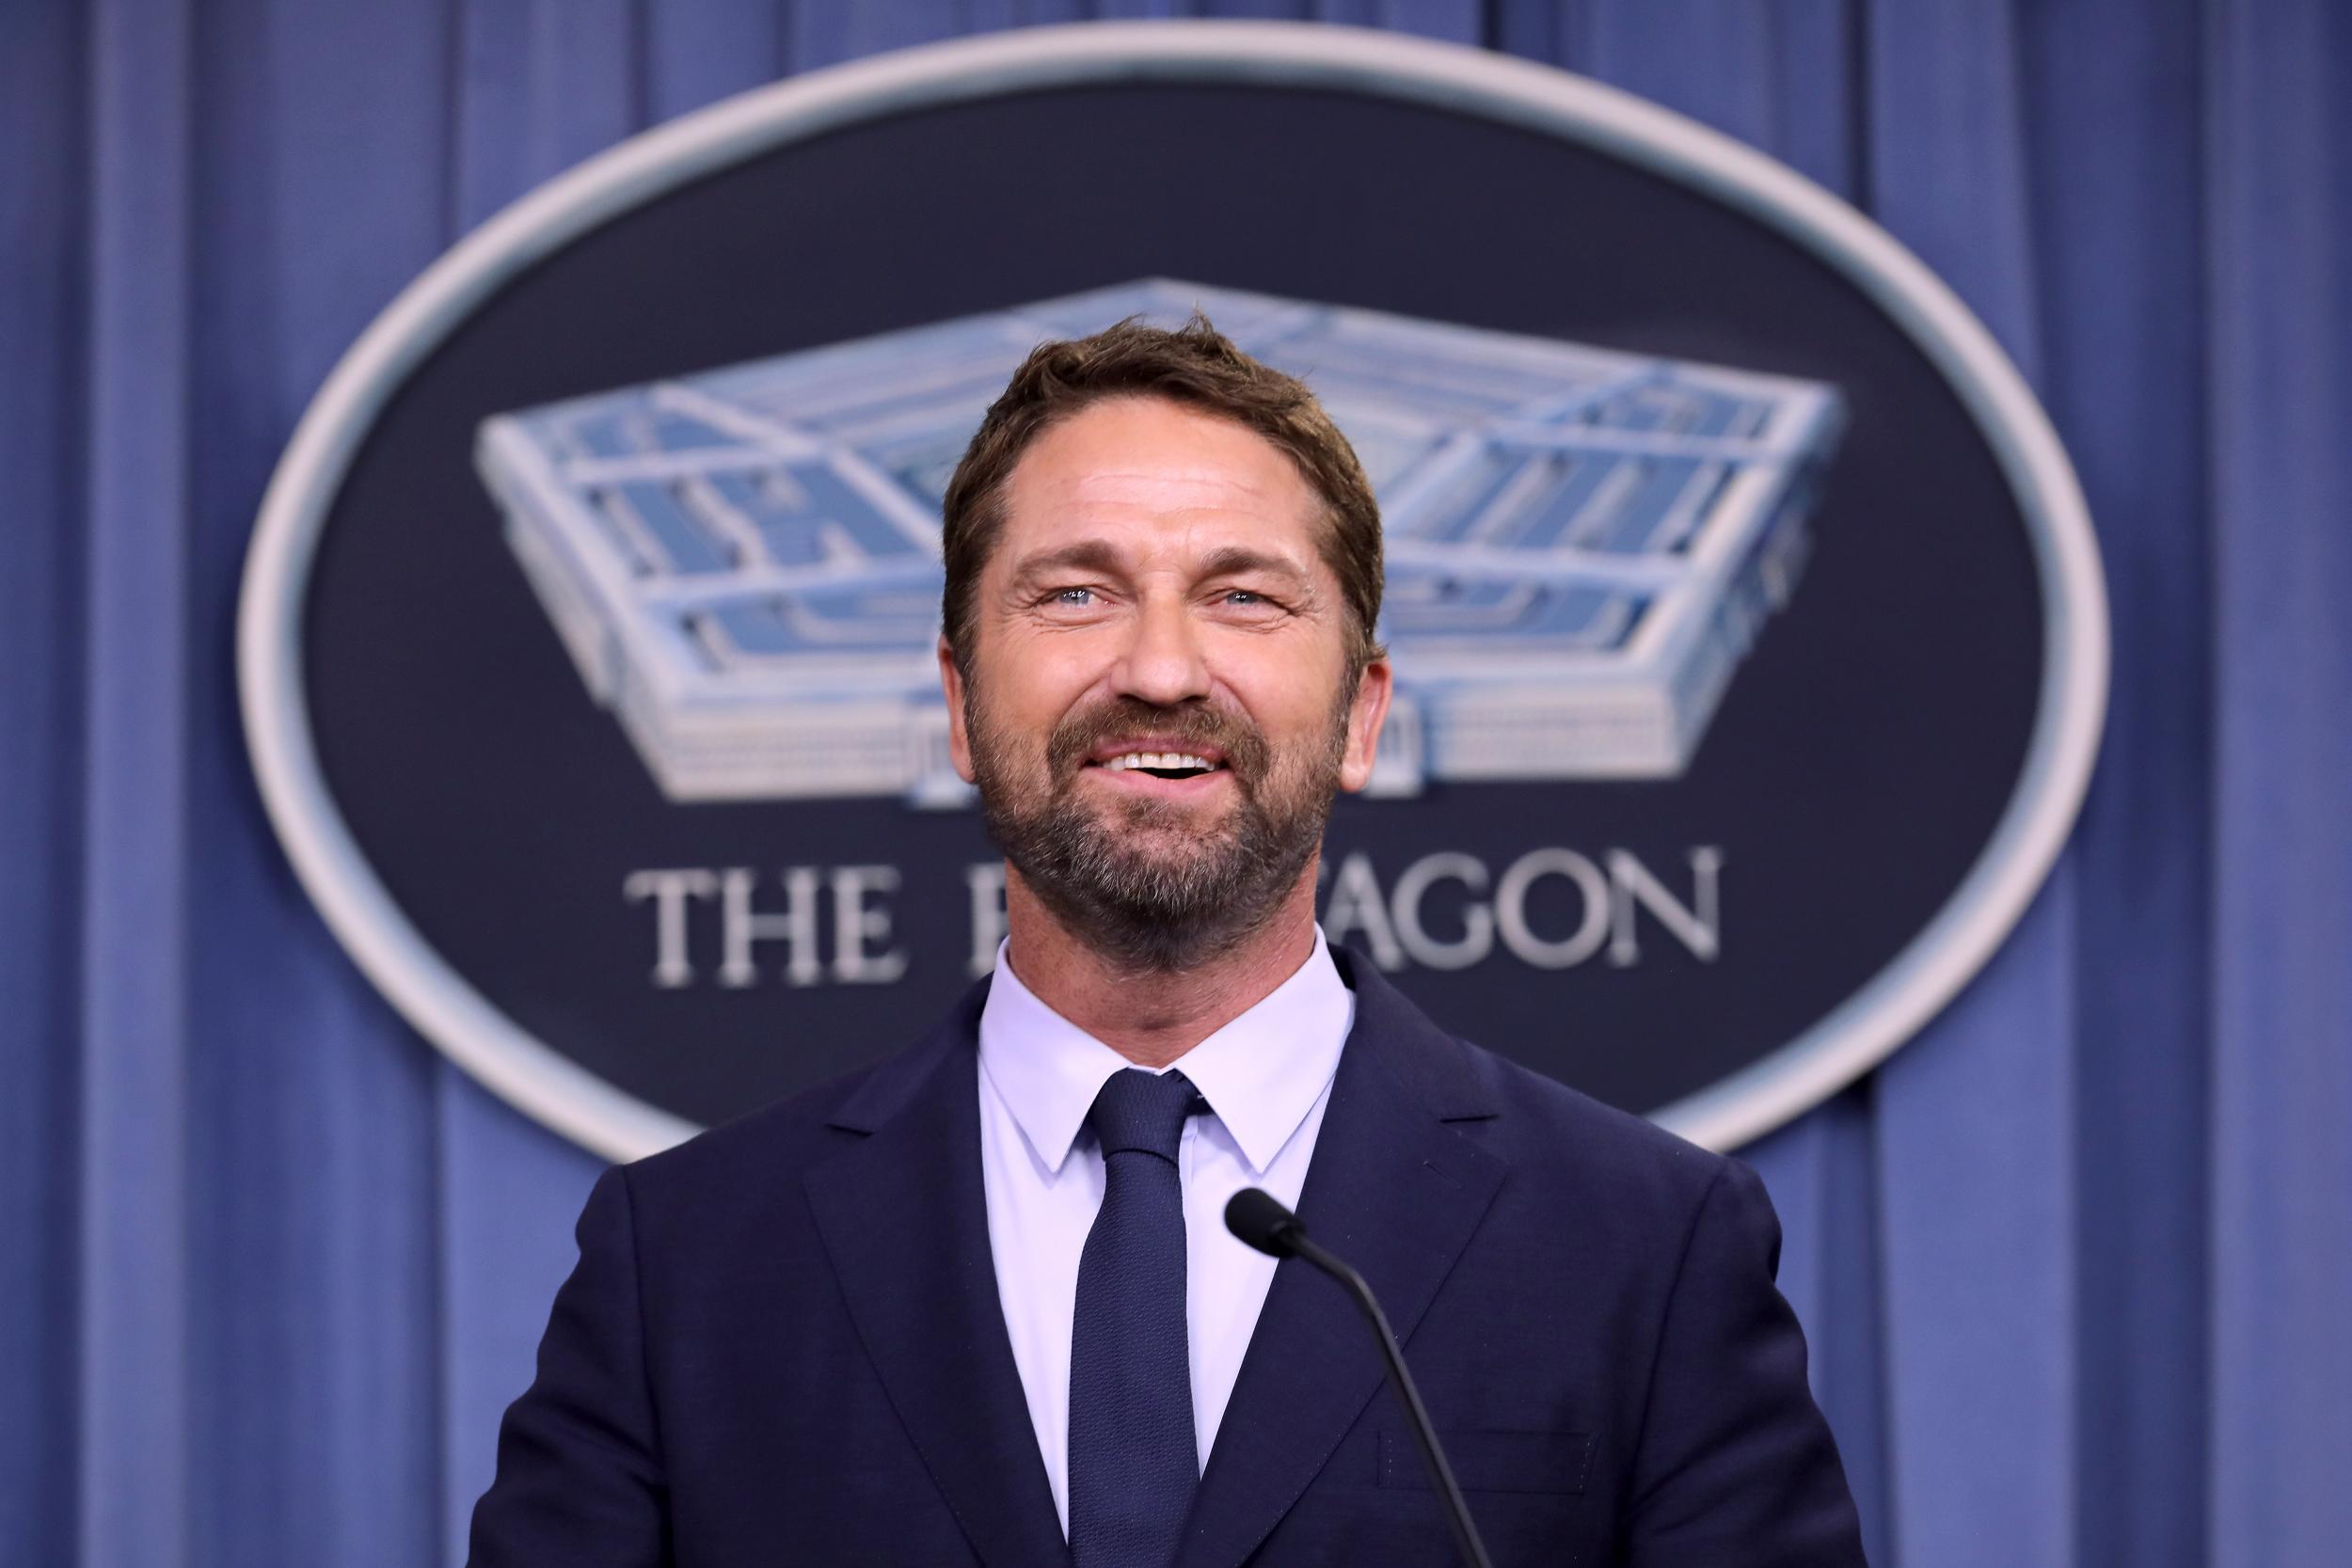 Gerard Butler answers more questions about new film at Pentagon than spokesperson has in last 5 months